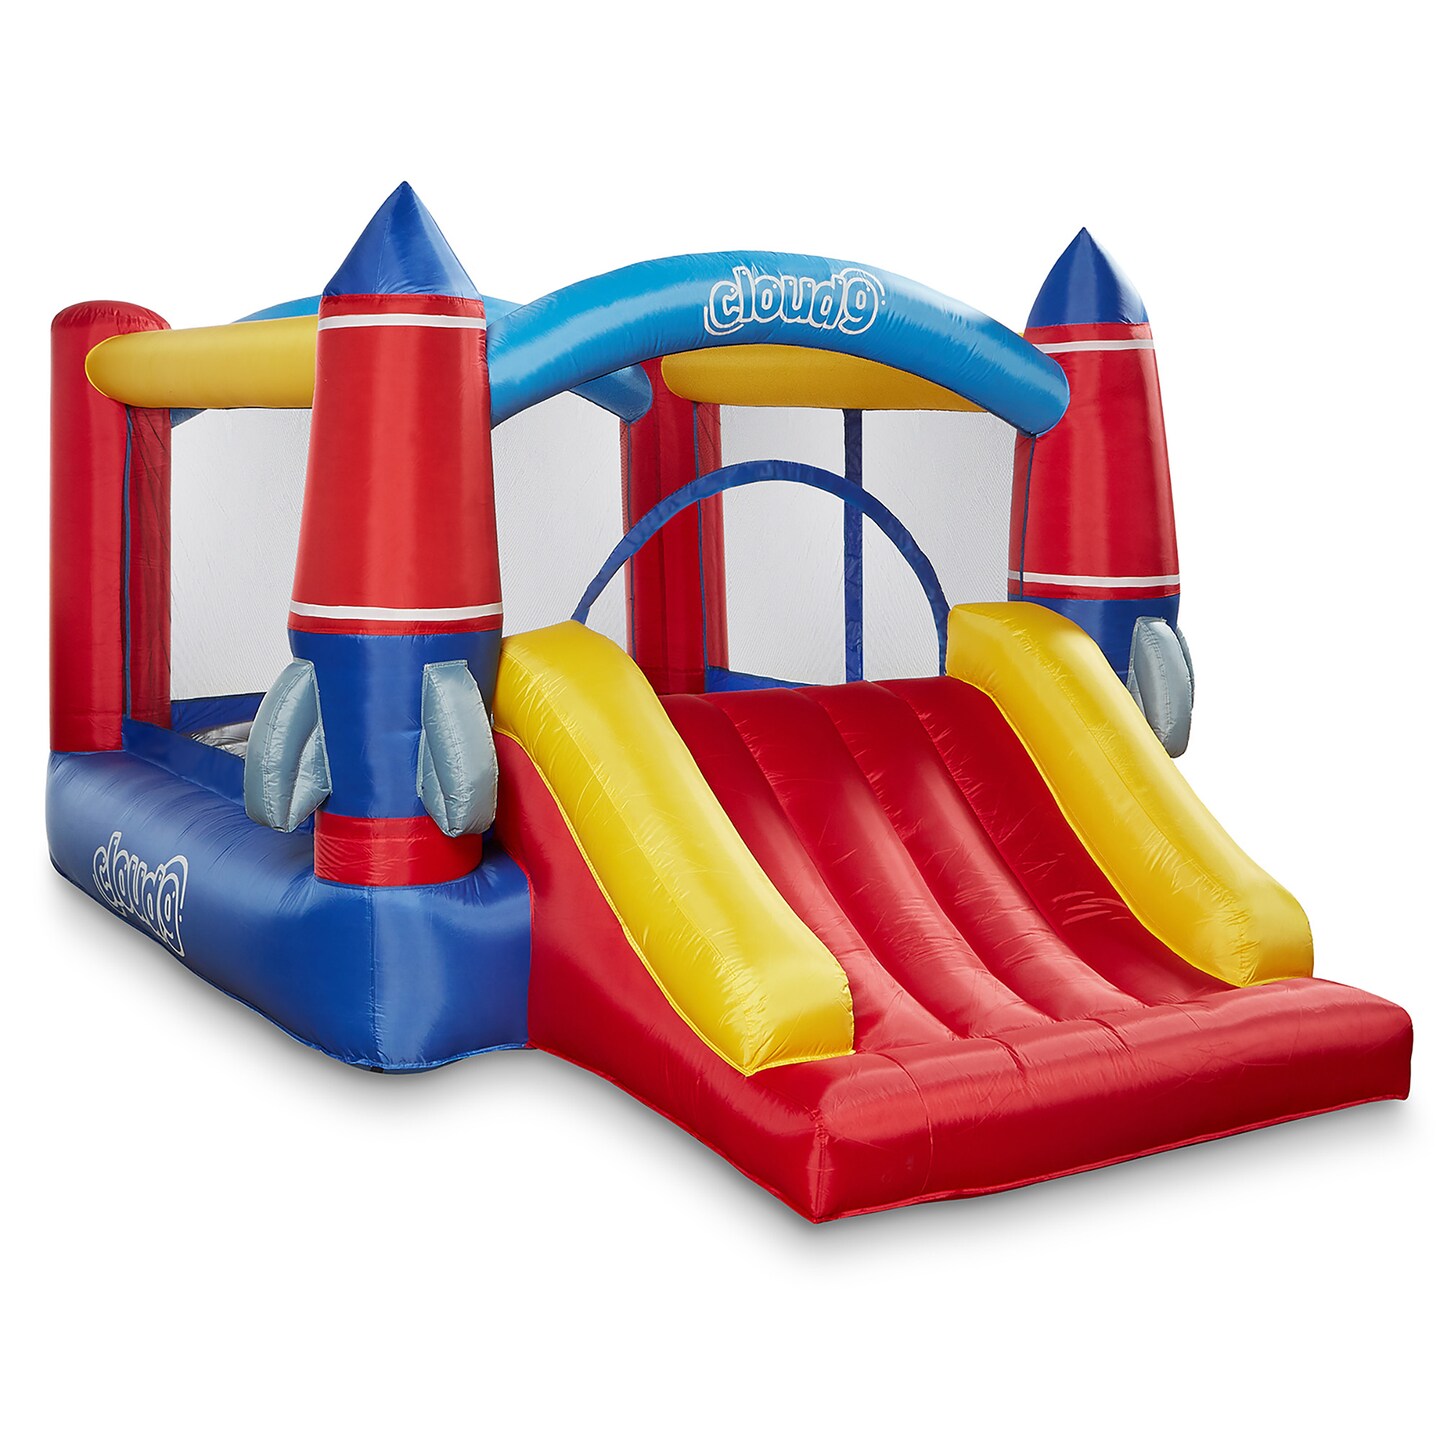 Cloud 9 Inflatable Bounce House and Blower, Rocket Theme Bouncer for Kids with Slide, Includes Stakes and Repair Patches